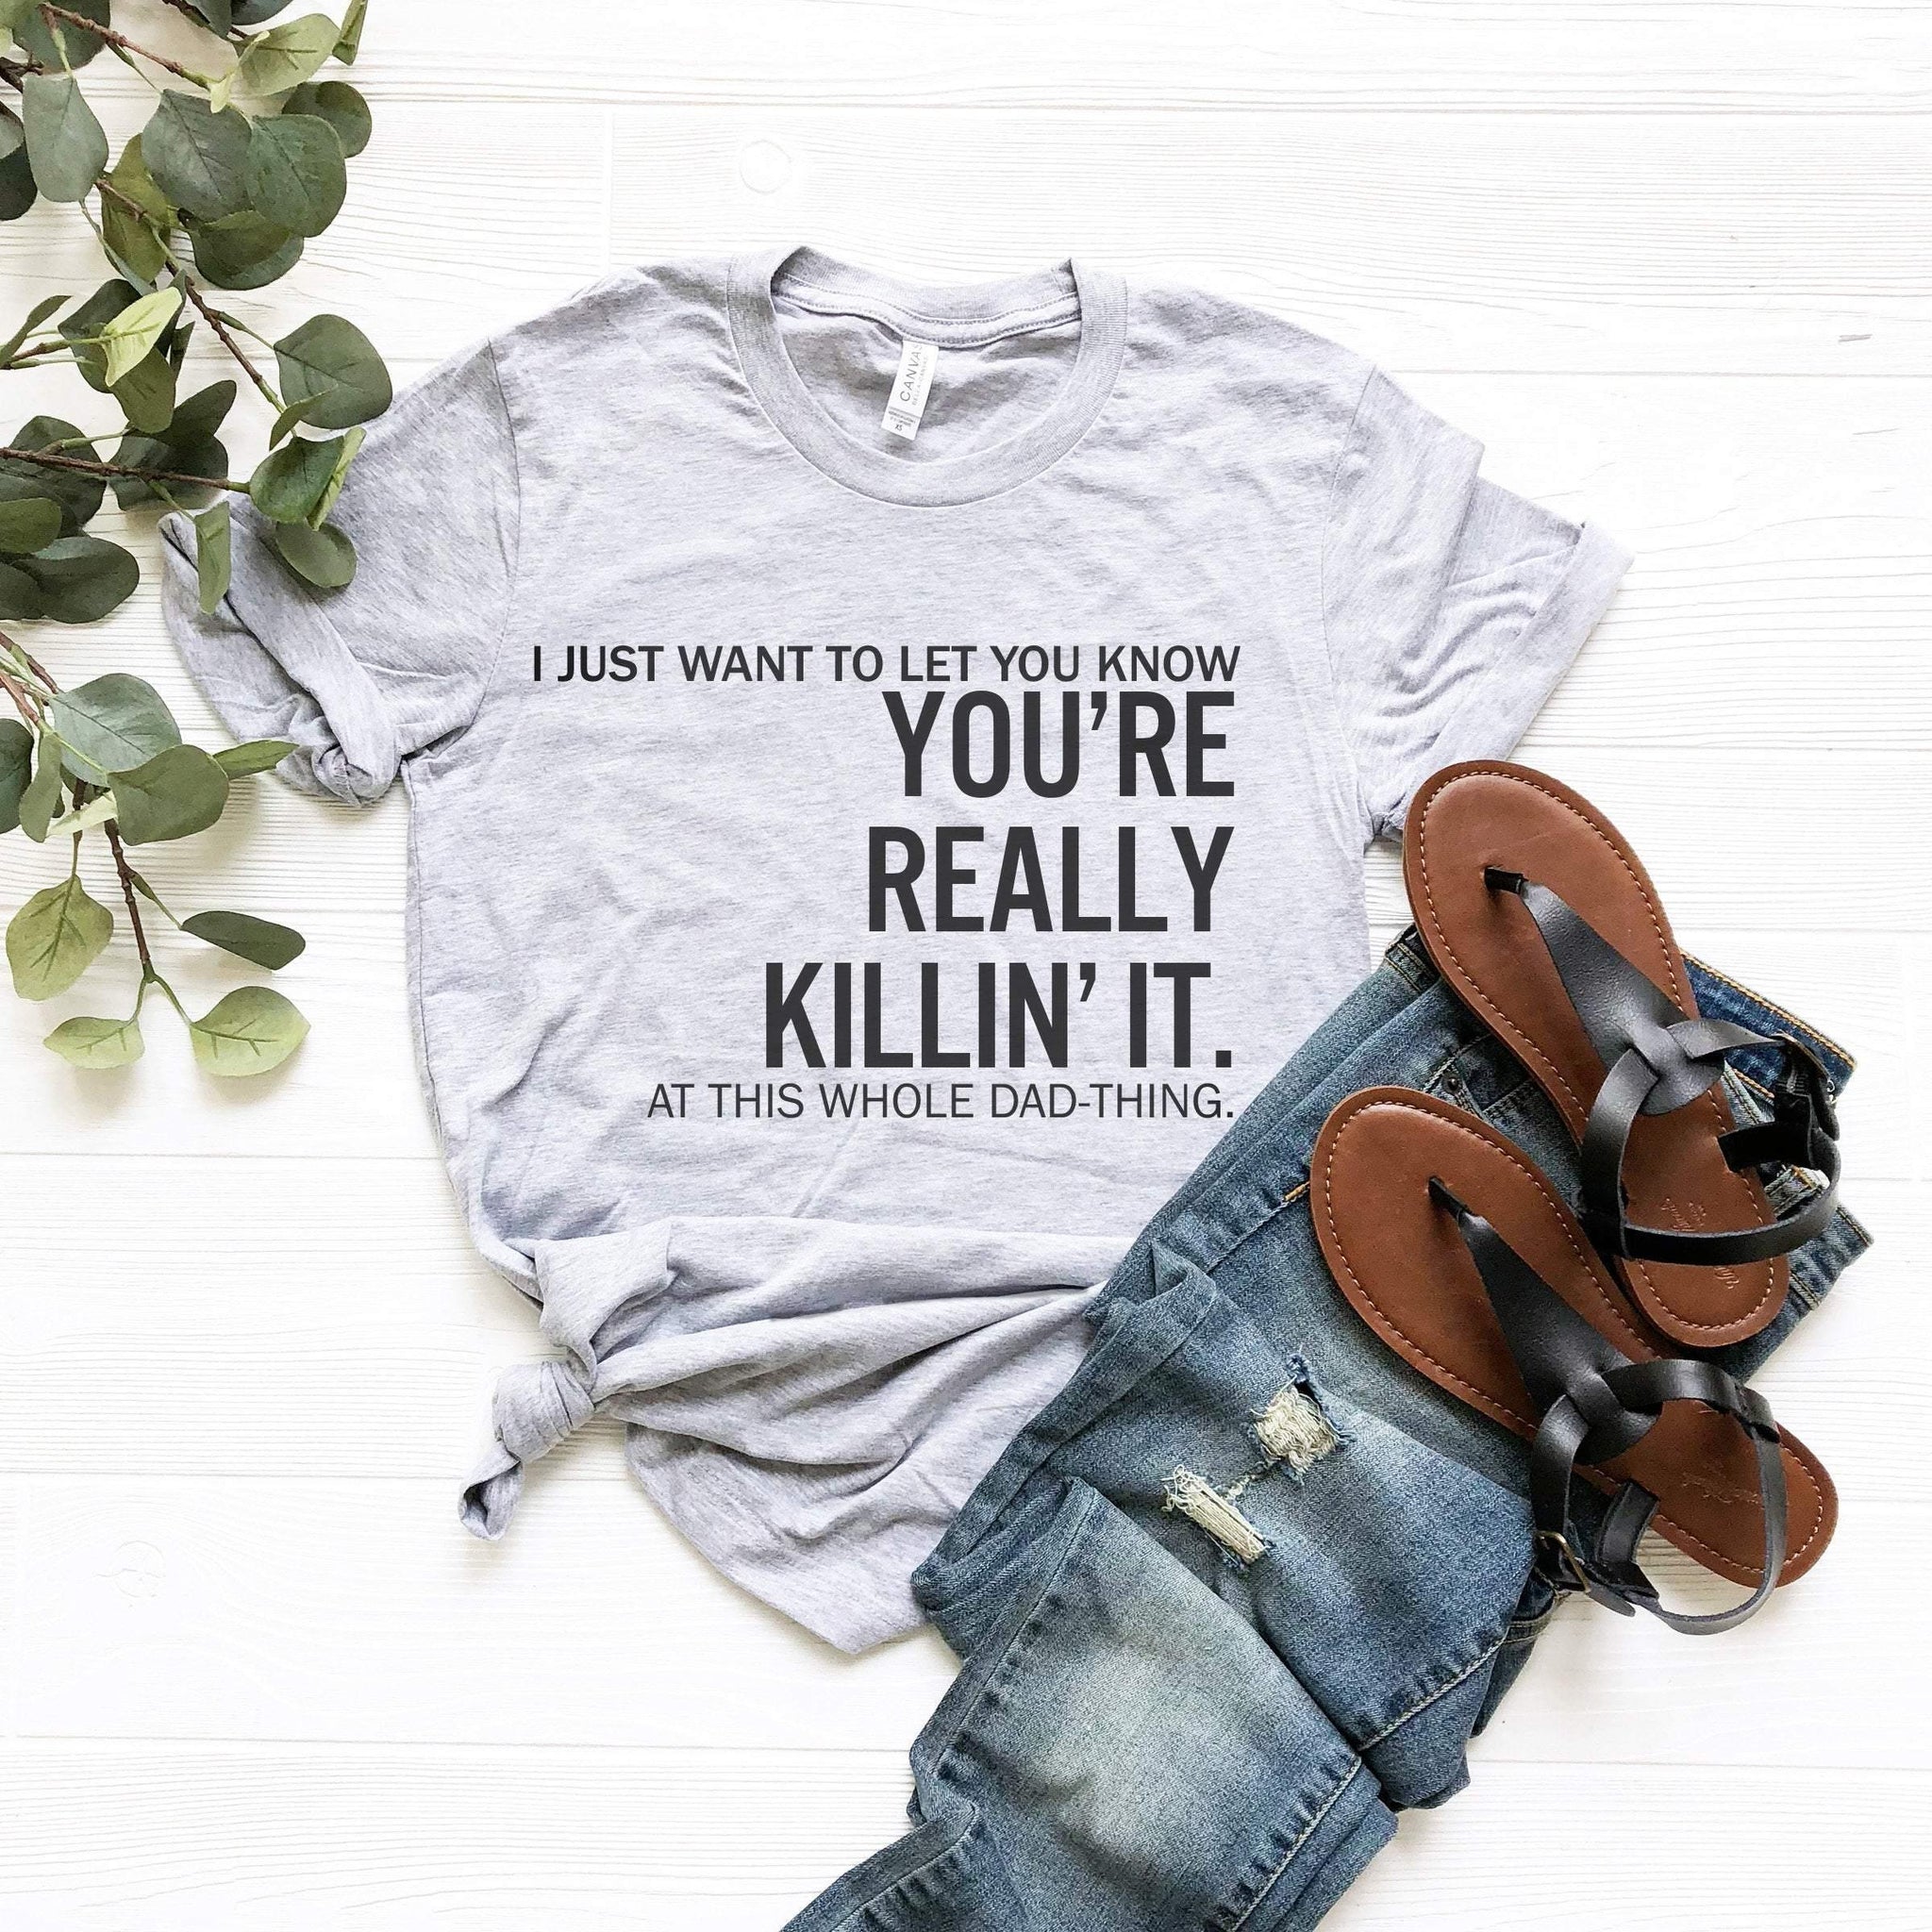 Dad You are Really Killin' It, Funny Dad shirts, for Fathers Day, Dad gifts , Dad shirts from daughter, Funny Shirts for dad, Dad Birthday, - Fastdeliverytees.com